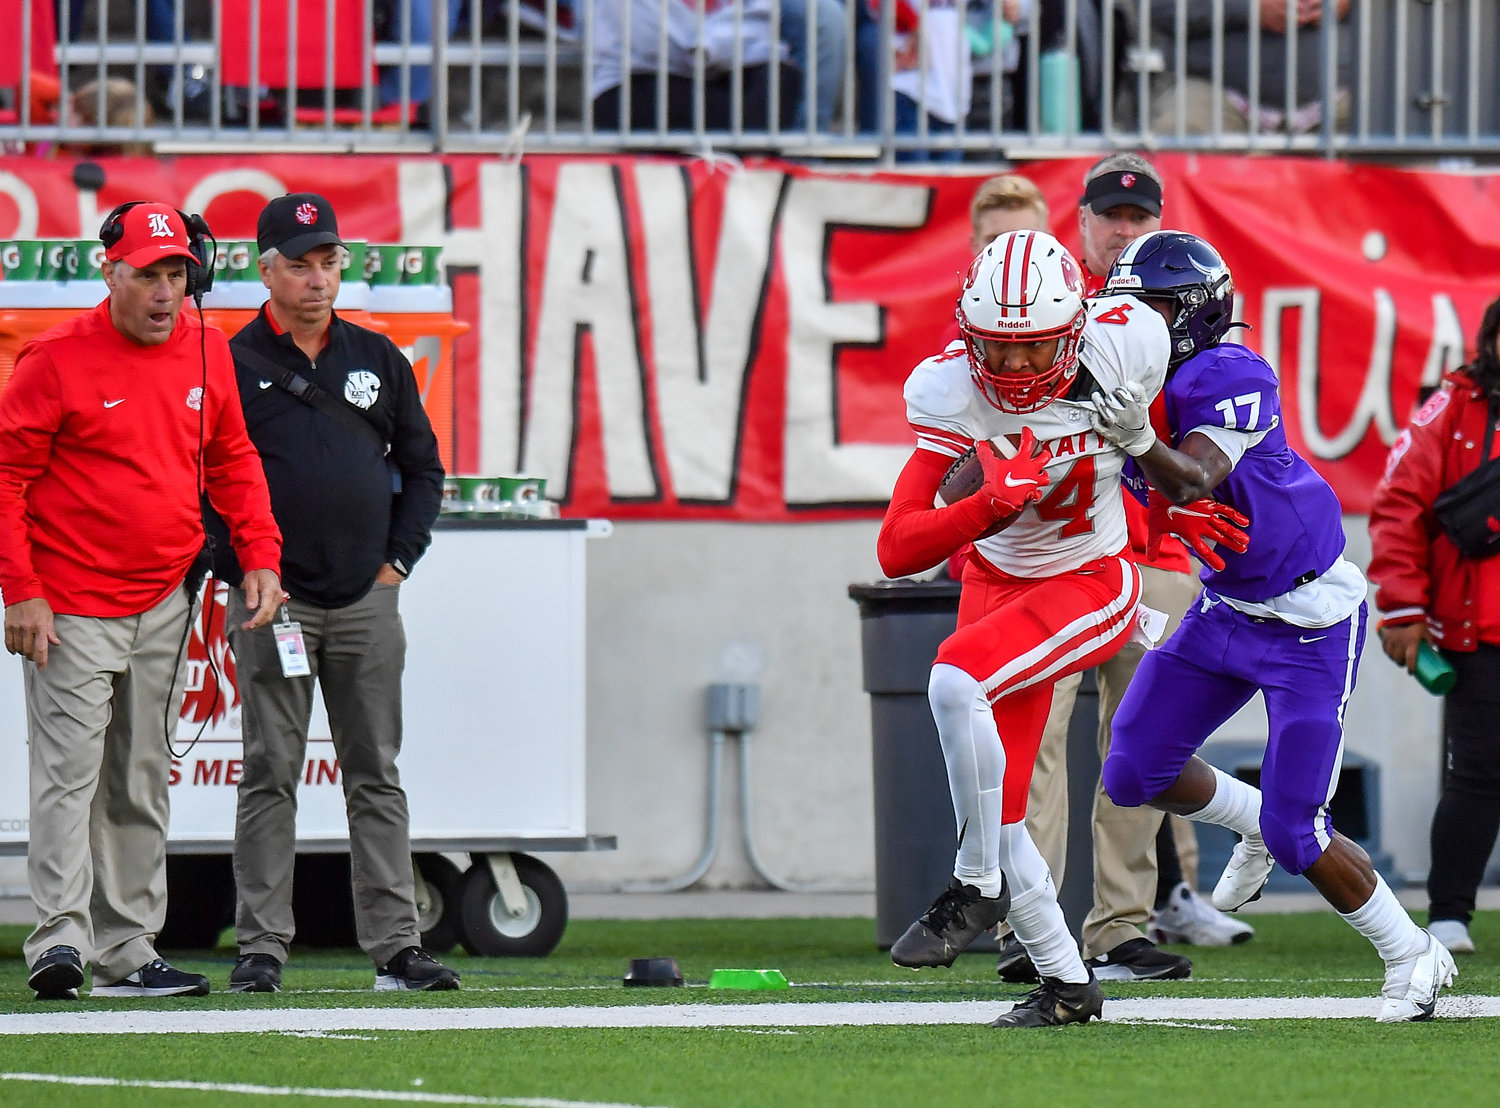 Katy, Tx. Nov 5, 2021: Katy's Nic Anderson #4 makes the reception to the outside before being brought down by Morton Ranch's Vontez Hood #17 during a conference game between Katy and Morton Ranch at Legacy Stadium in Katy. (Photo by Mark Goodman / Katy Times)